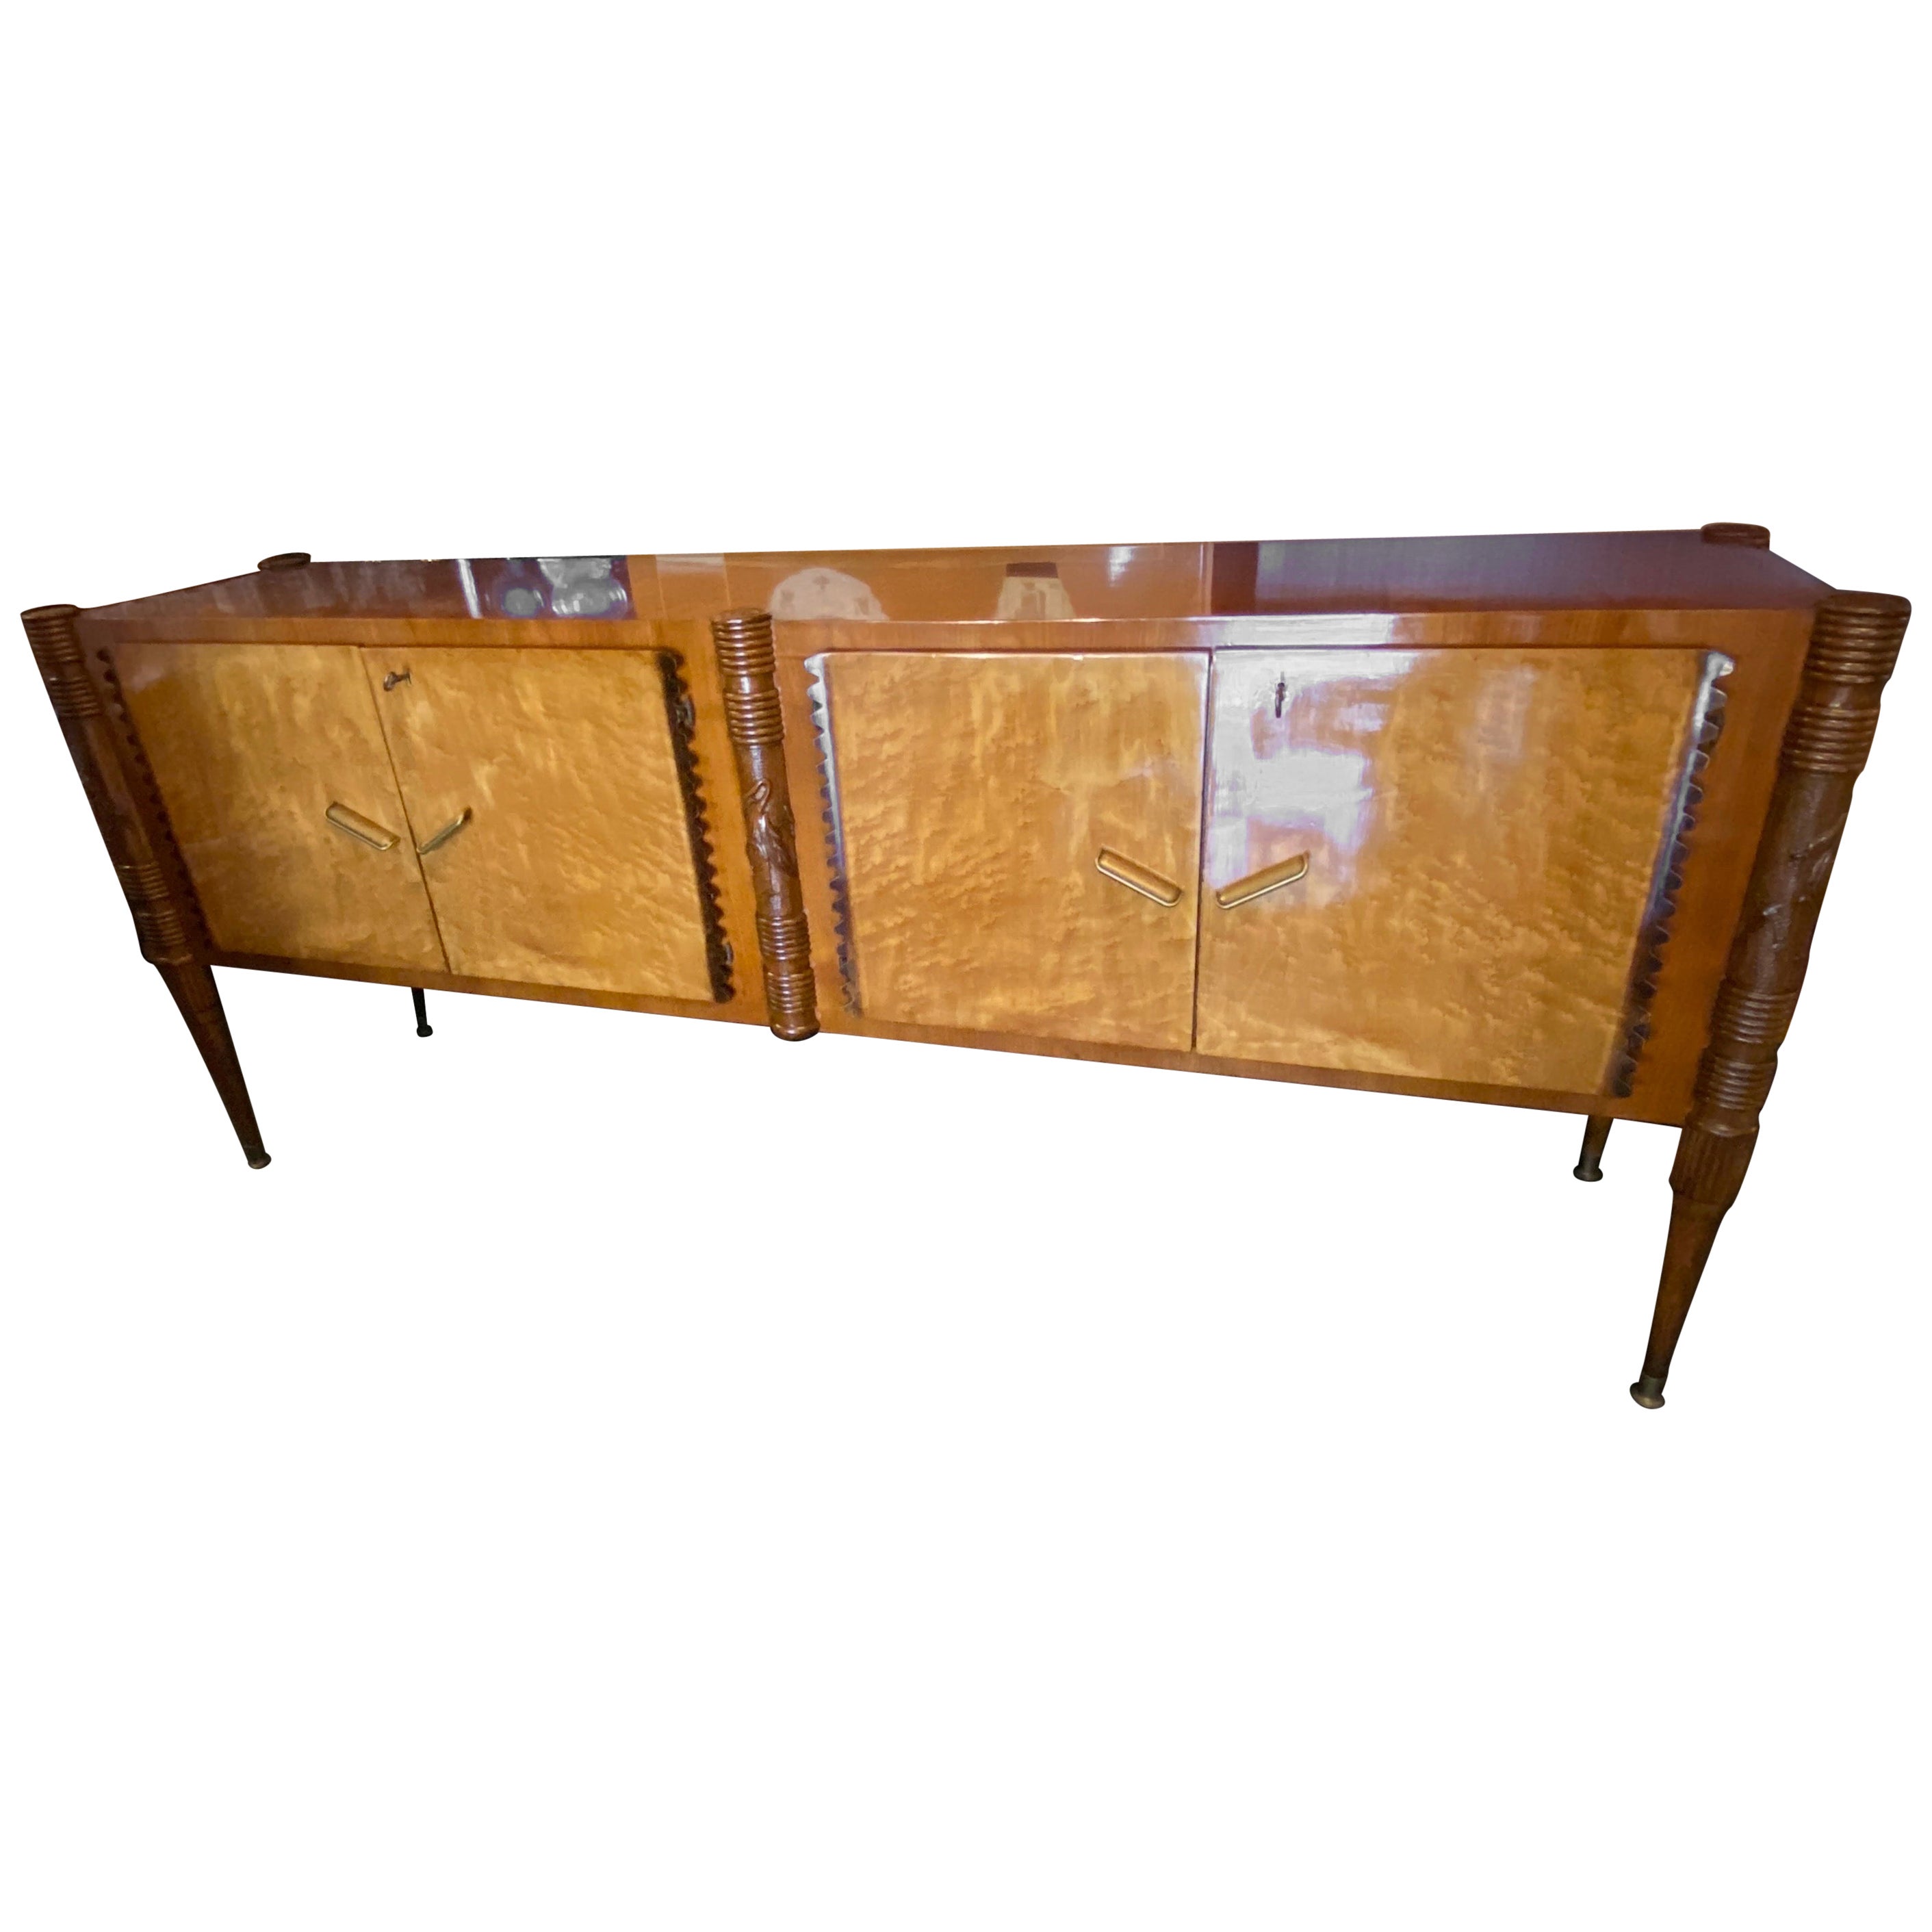 1950s Mid-Century Modern Hand-Carved Wood Italian Sideboard by Pier Luigi Colli For Sale